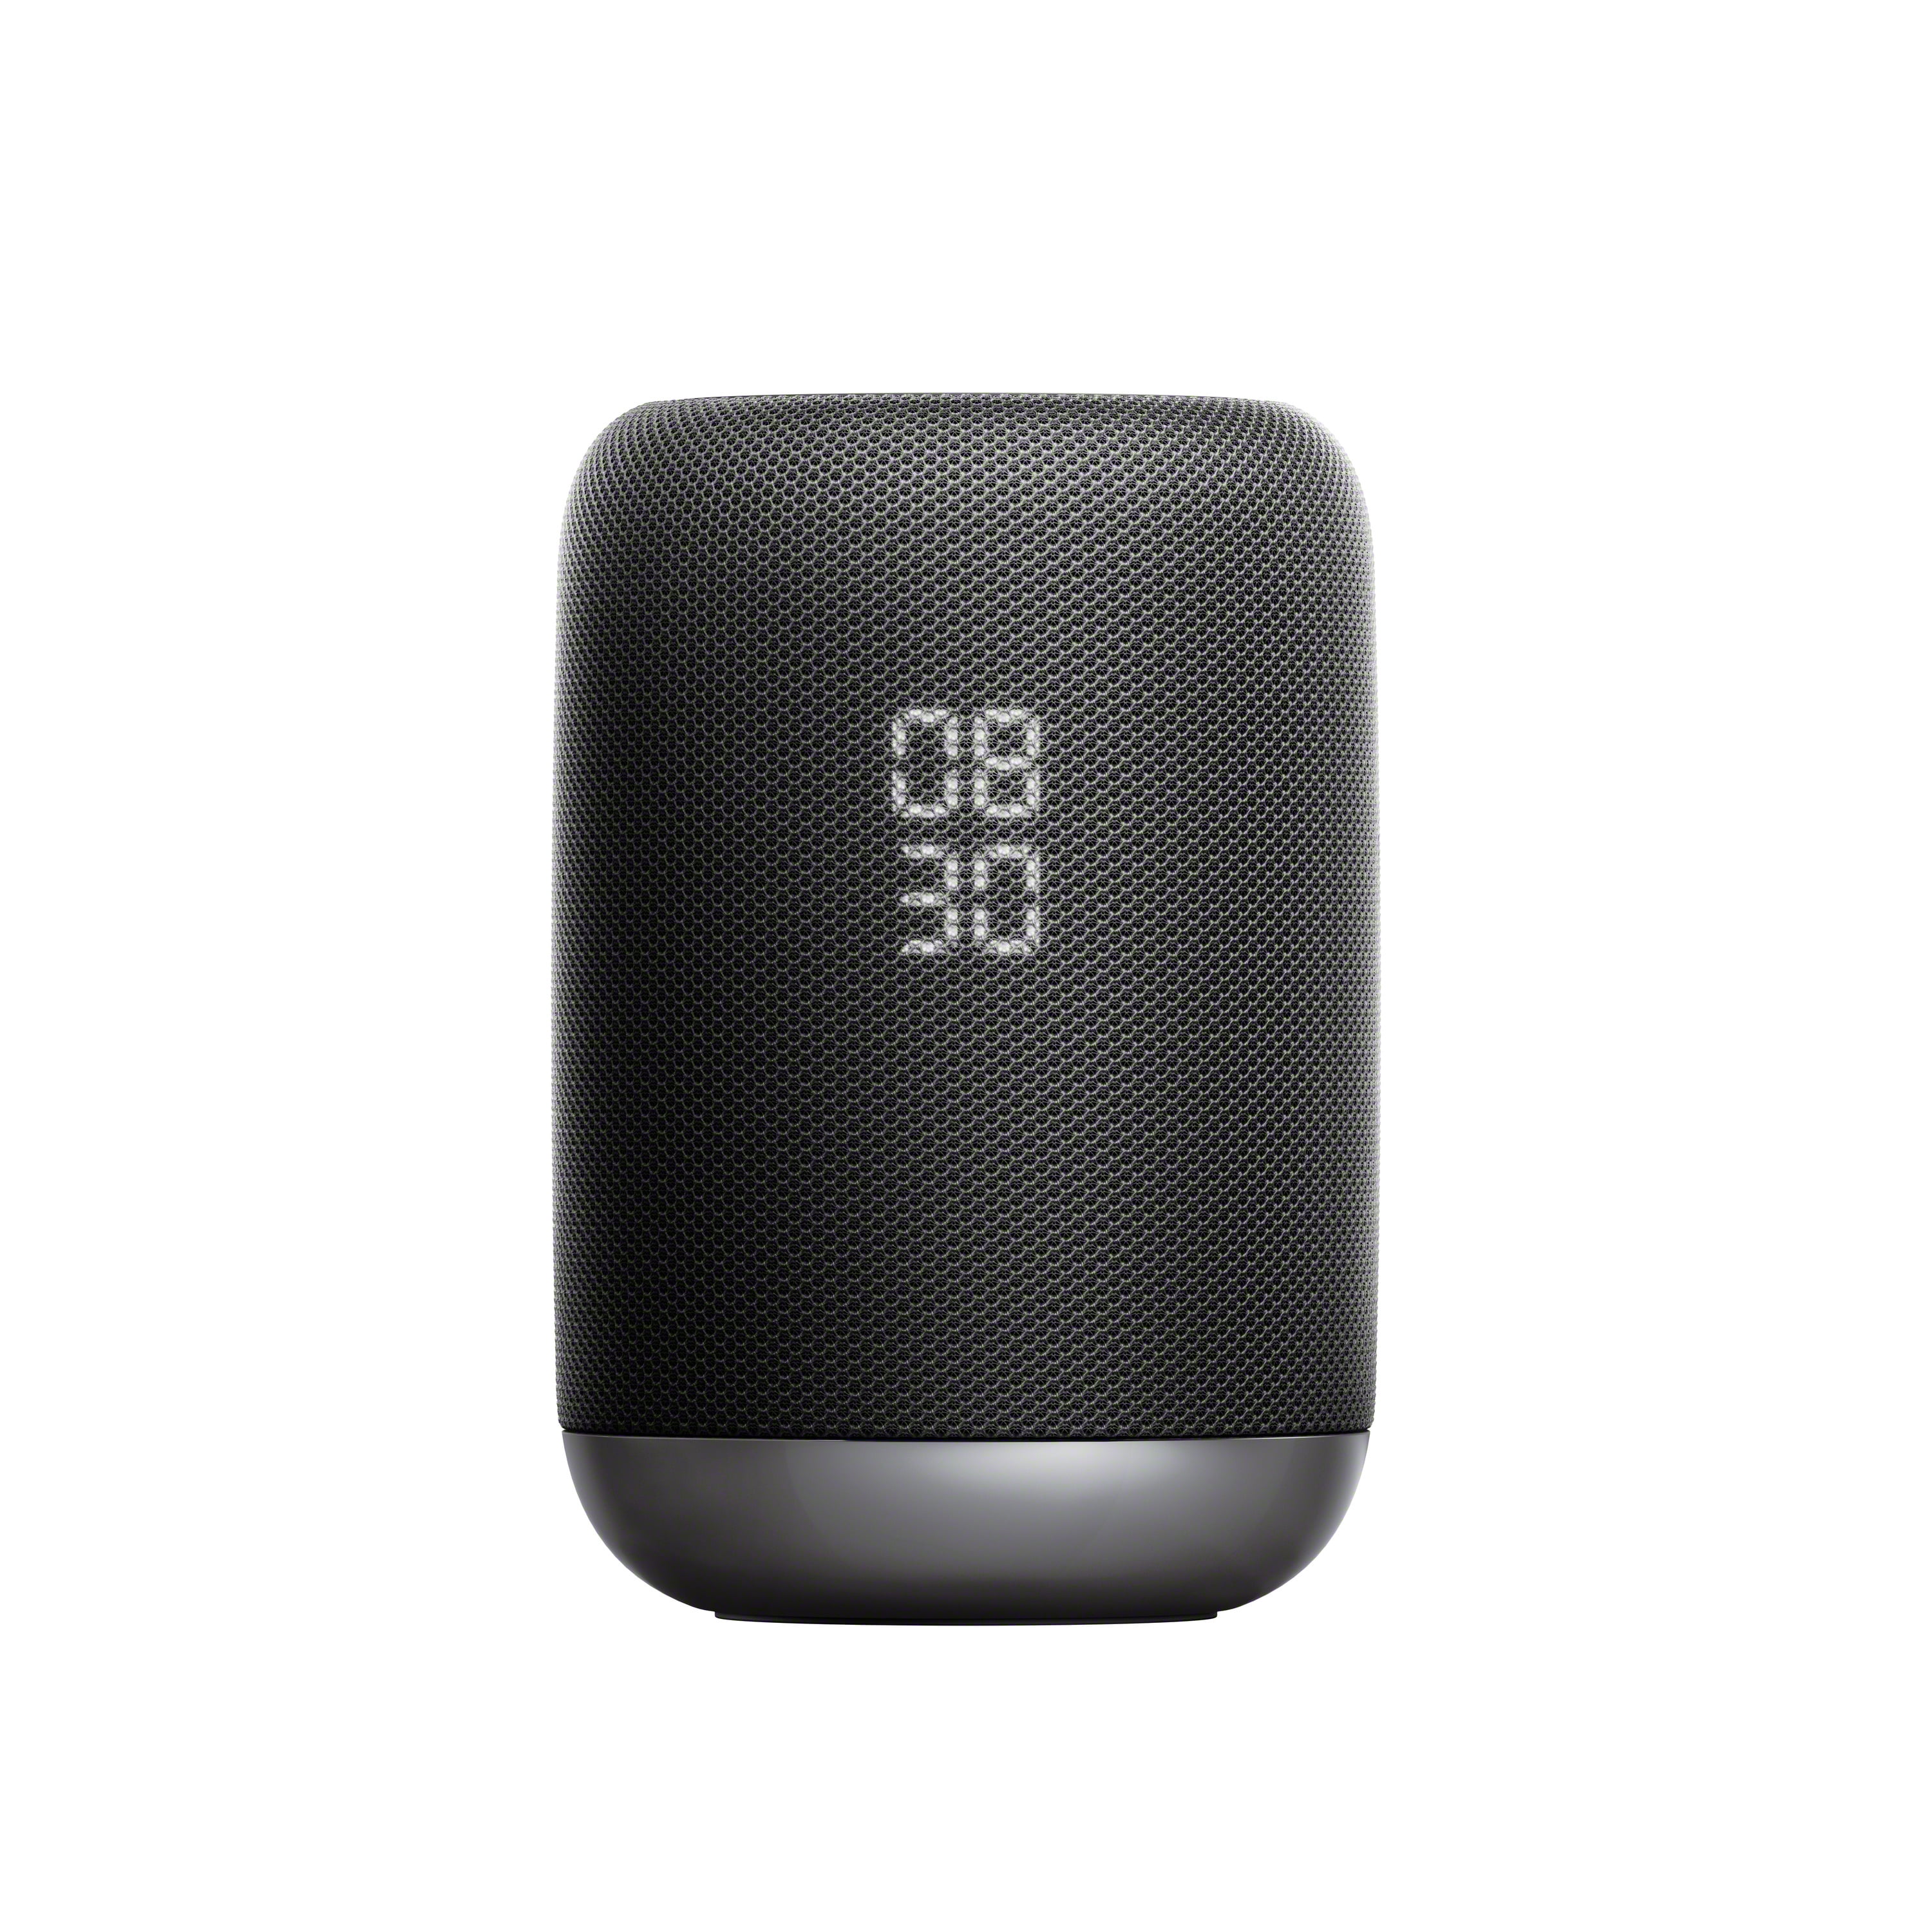 Black NEW Sony Smart Speaker Lfs50g With Google Assistant Built in 